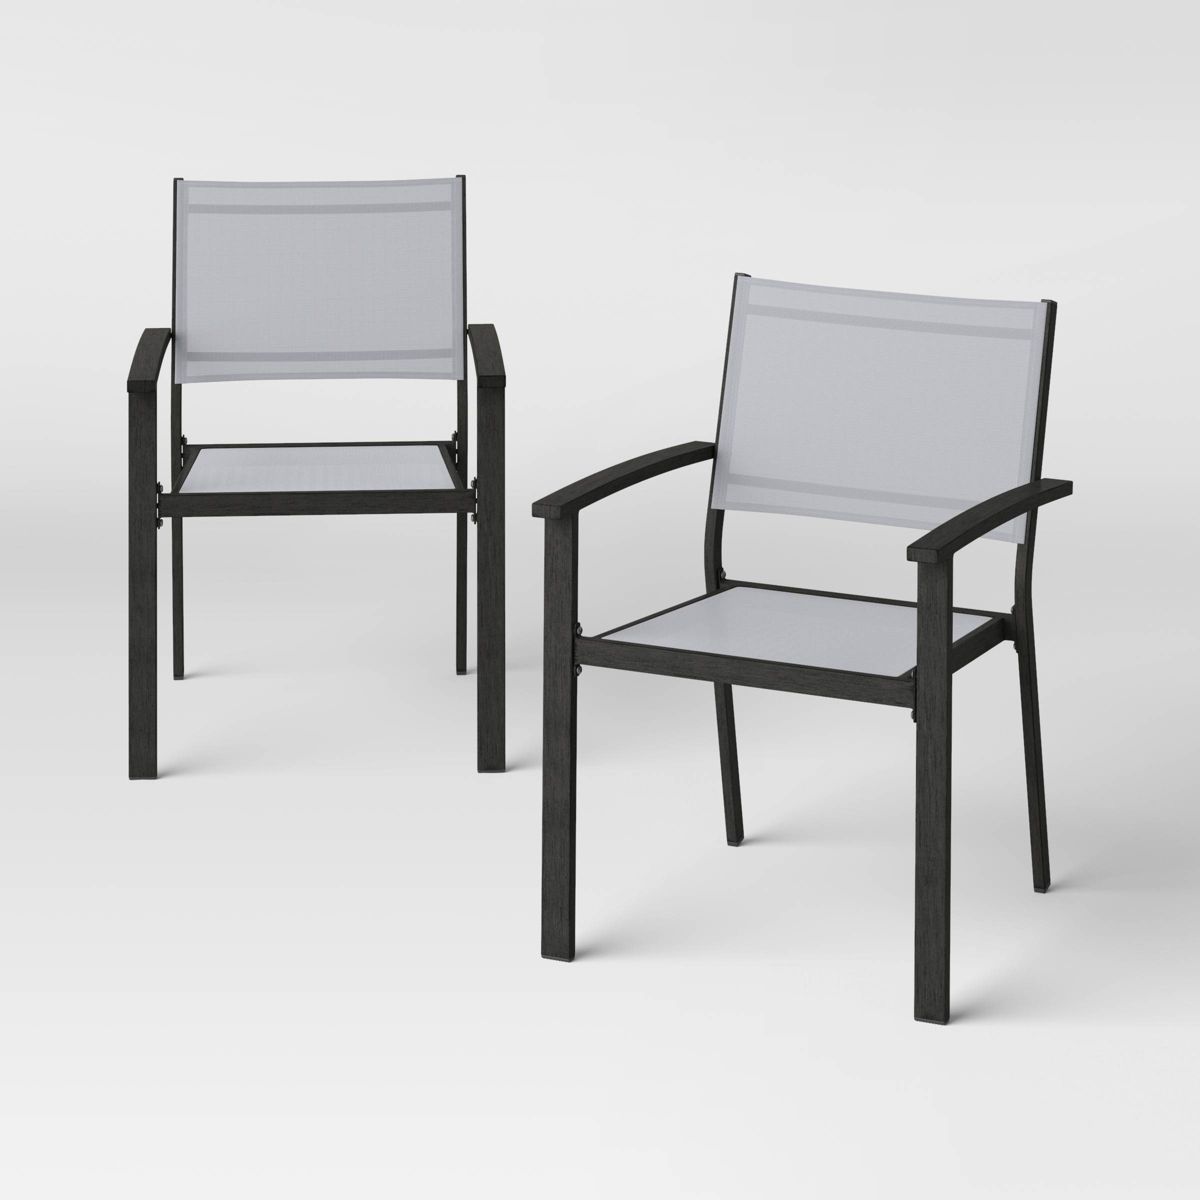 2pc Ryegate Weathered Teak Sling Outdoor Patio Dining Chairs Arm Chairs Gray - Threshold™